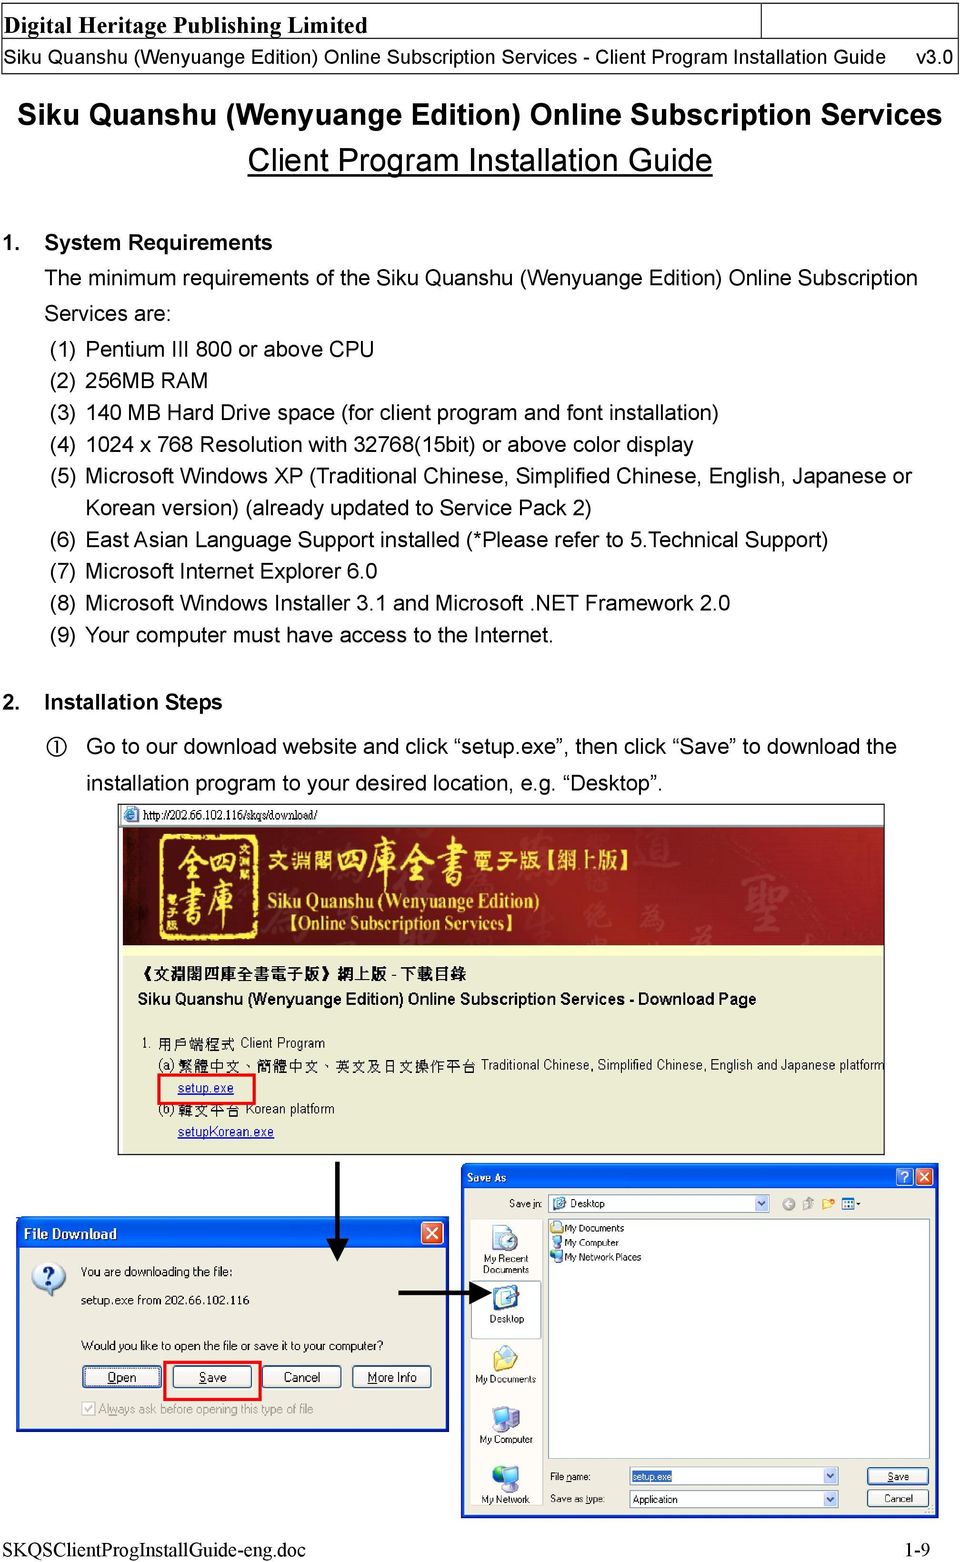 client program and font installation) (4) 1024 x 768 Resolution with 32768(15bit) or above color display (5) Microsoft Windows XP (Traditional Chinese, Simplified Chinese, English, Japanese or Korean